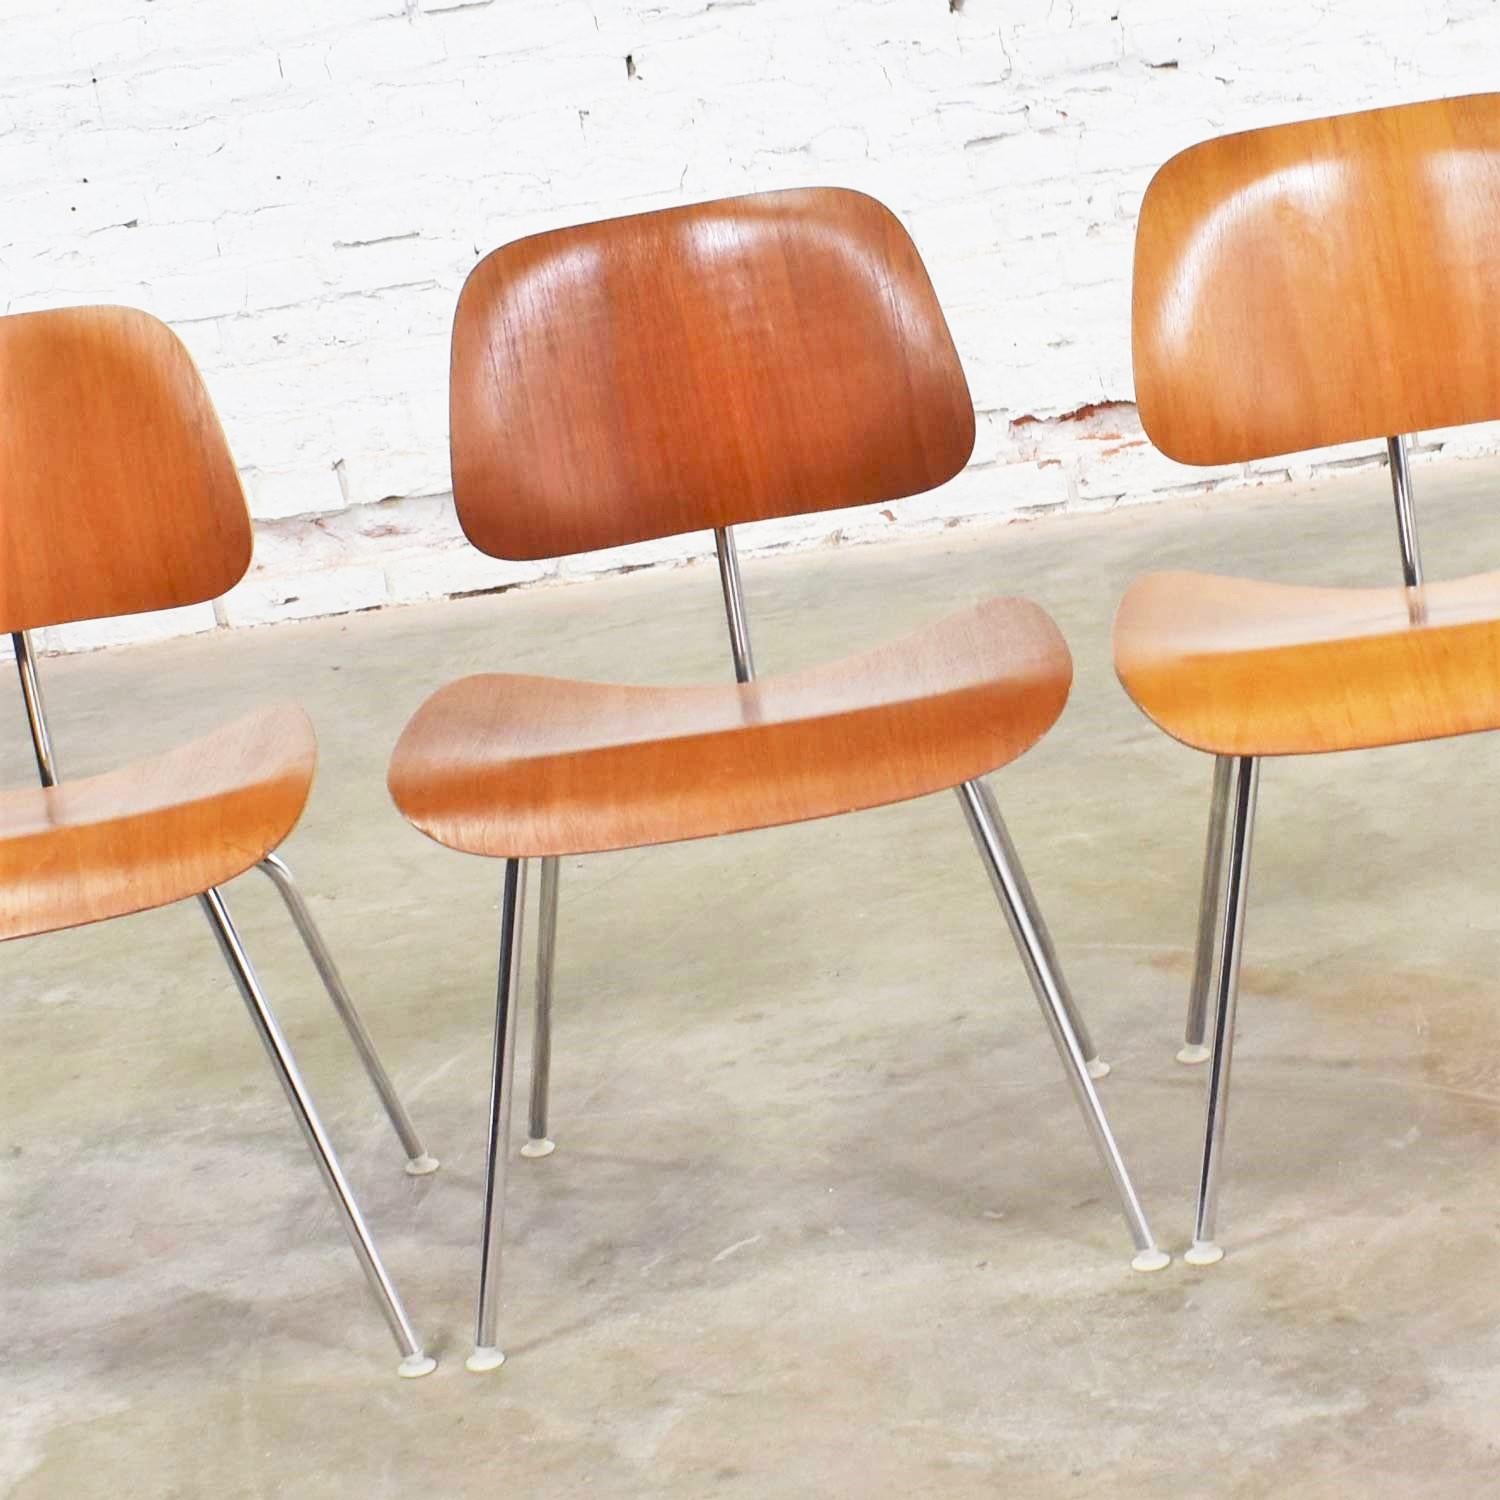 Handsome set of 4 vintage Mid-Century Modern Eames DCM, dining chair metal, dining chairs for Herman Miller with silver colored bases, white nylon feet, and walnut veneer. They are in overall wonderful vintage condition. There are some small flaws